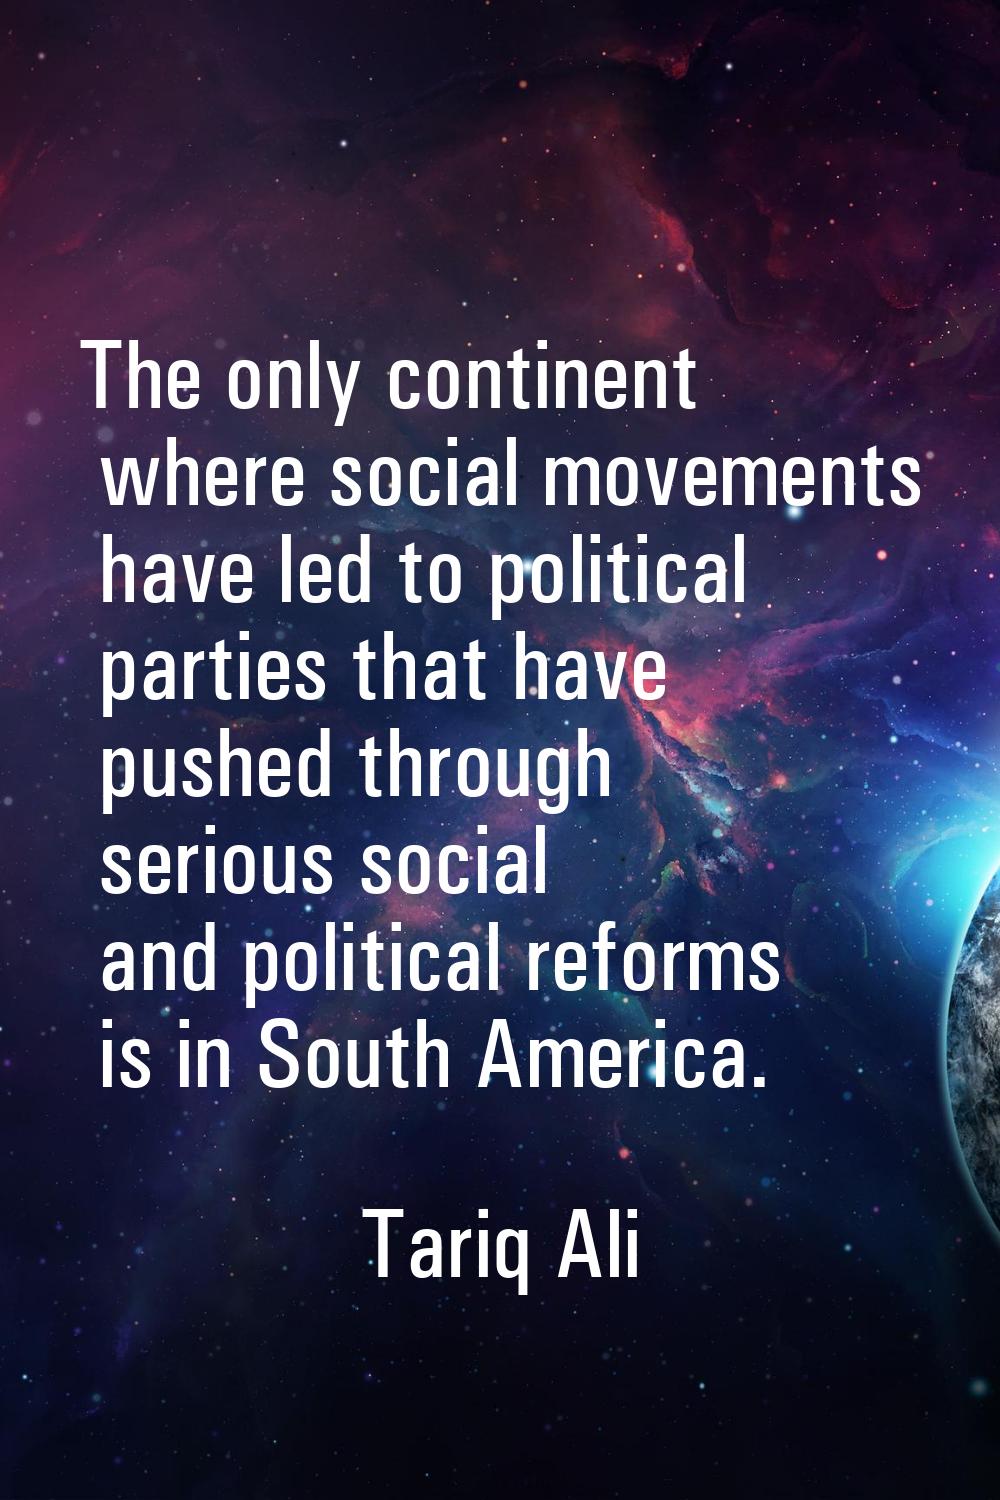 The only continent where social movements have led to political parties that have pushed through se